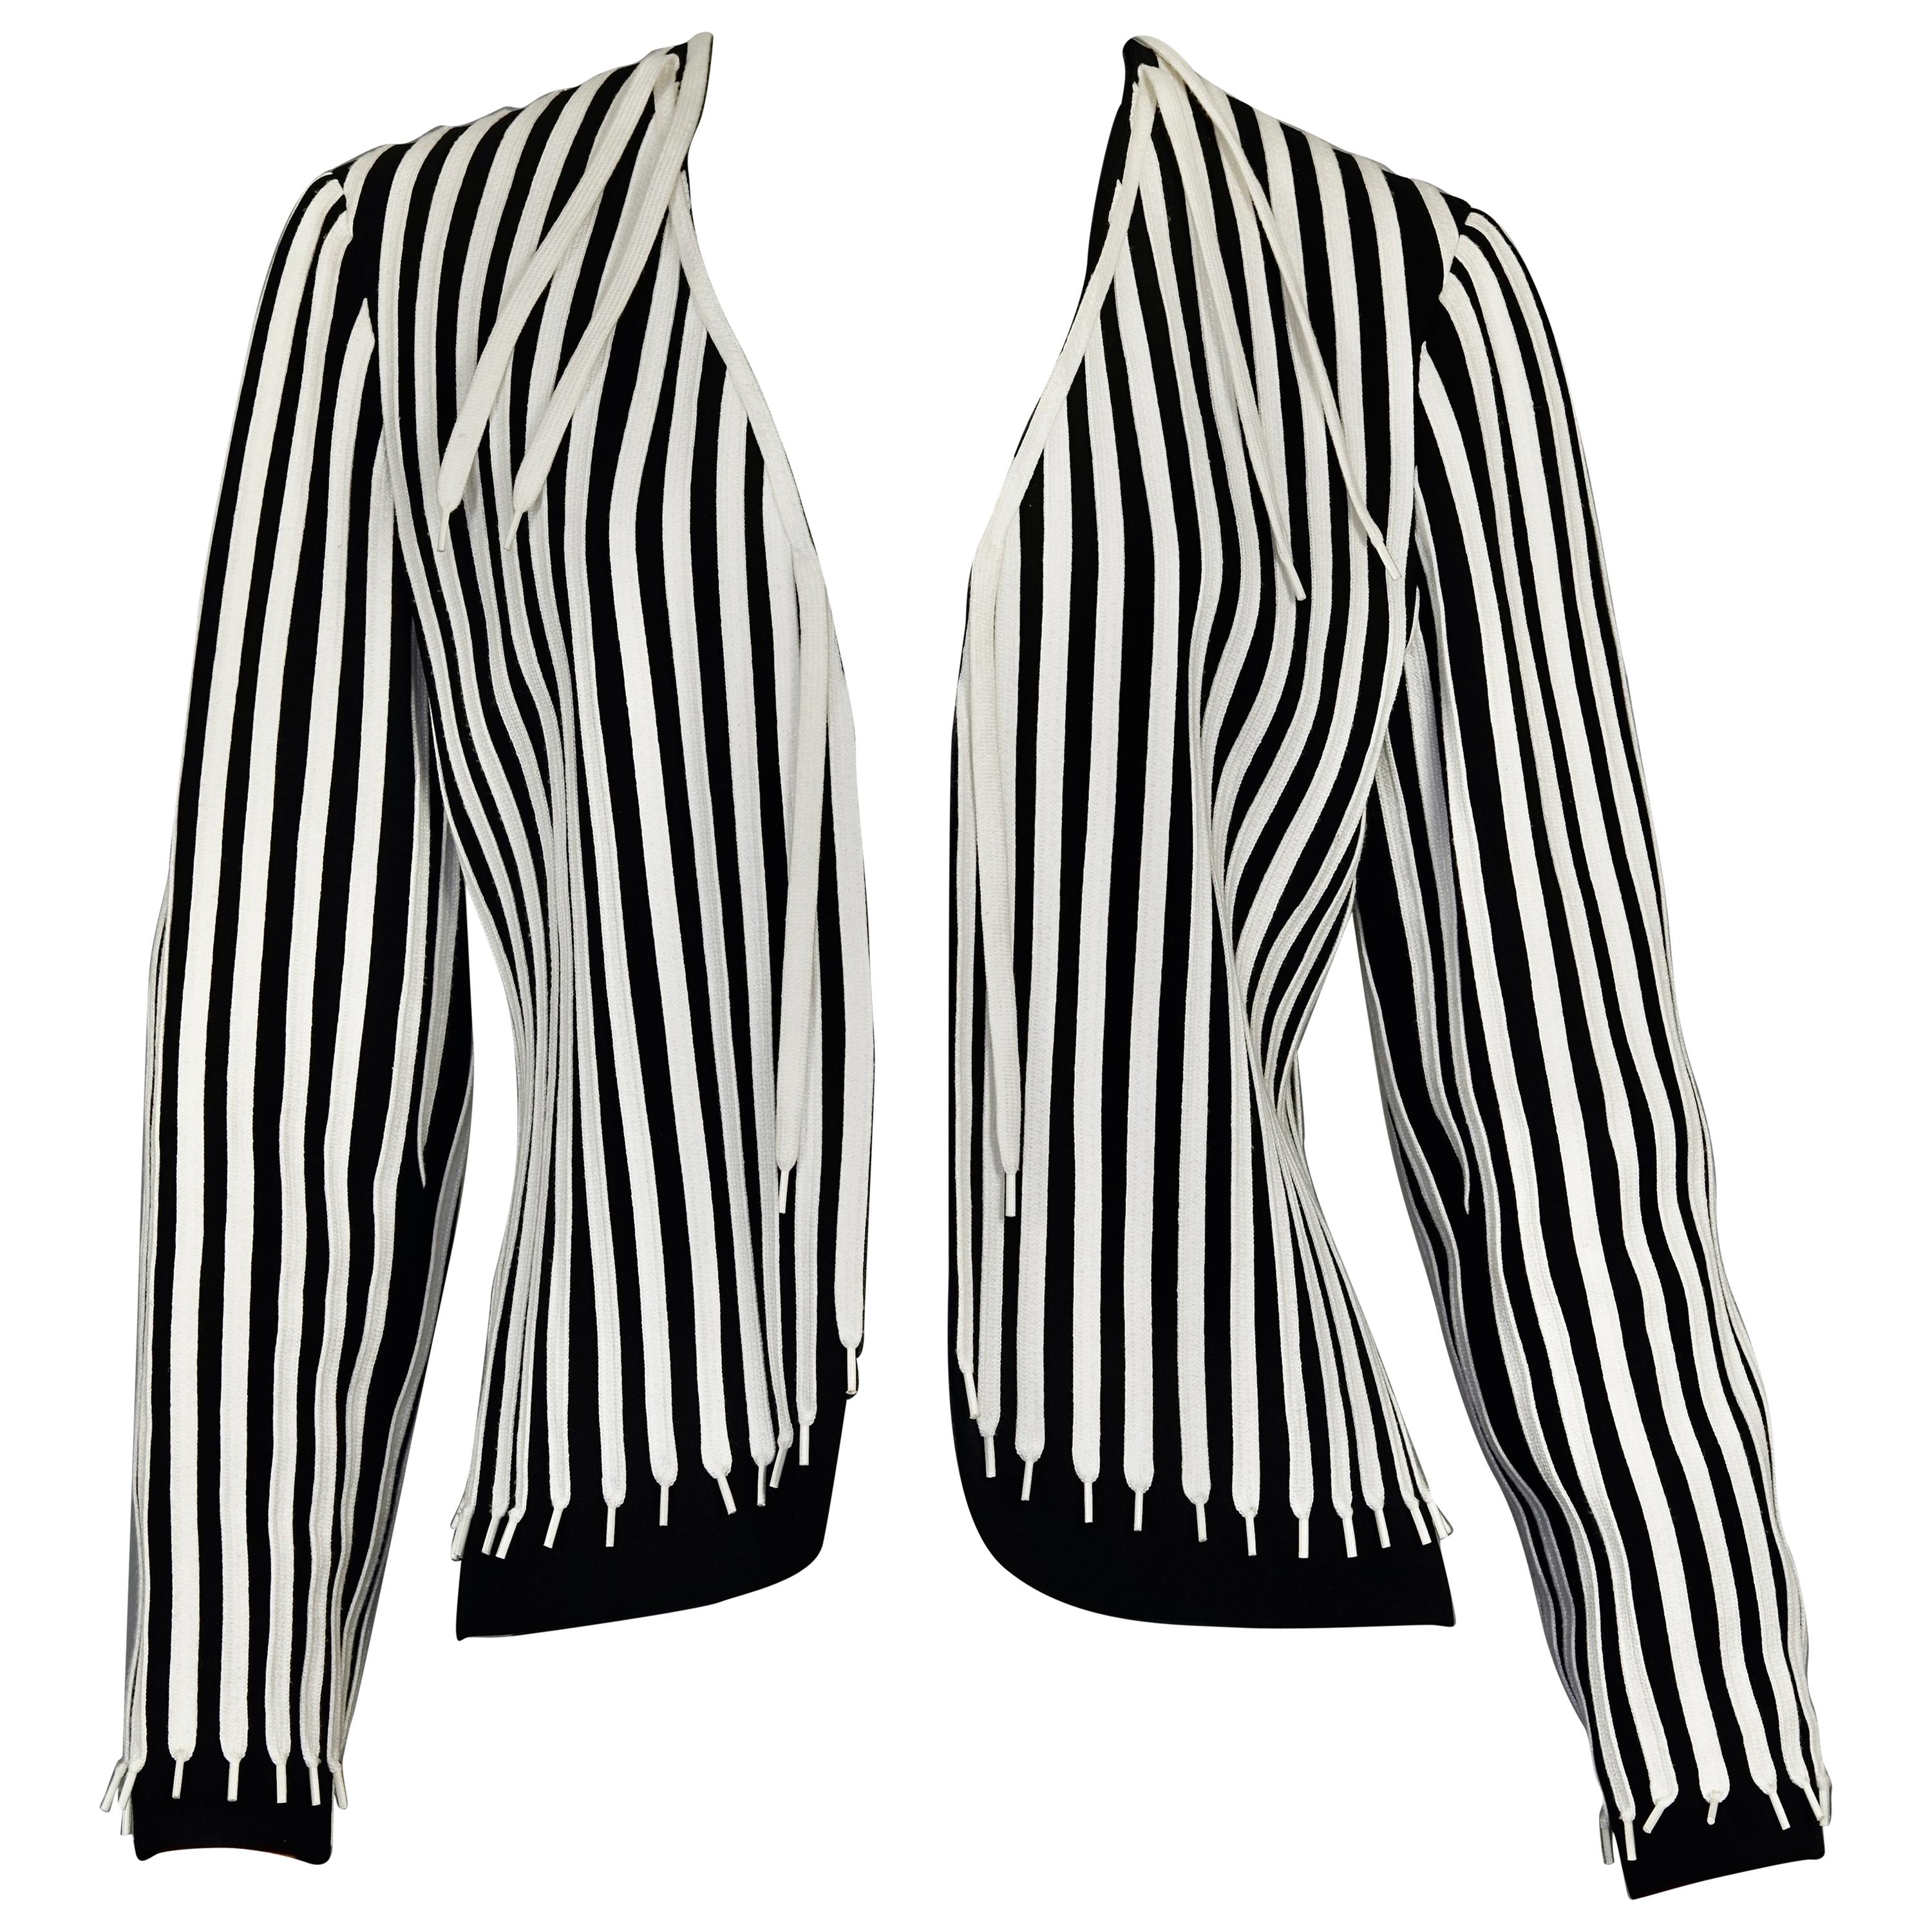 Vintage MOSCHINO CHEAP and CHIC Black and White Shoestring Novelty Blazer Jacket